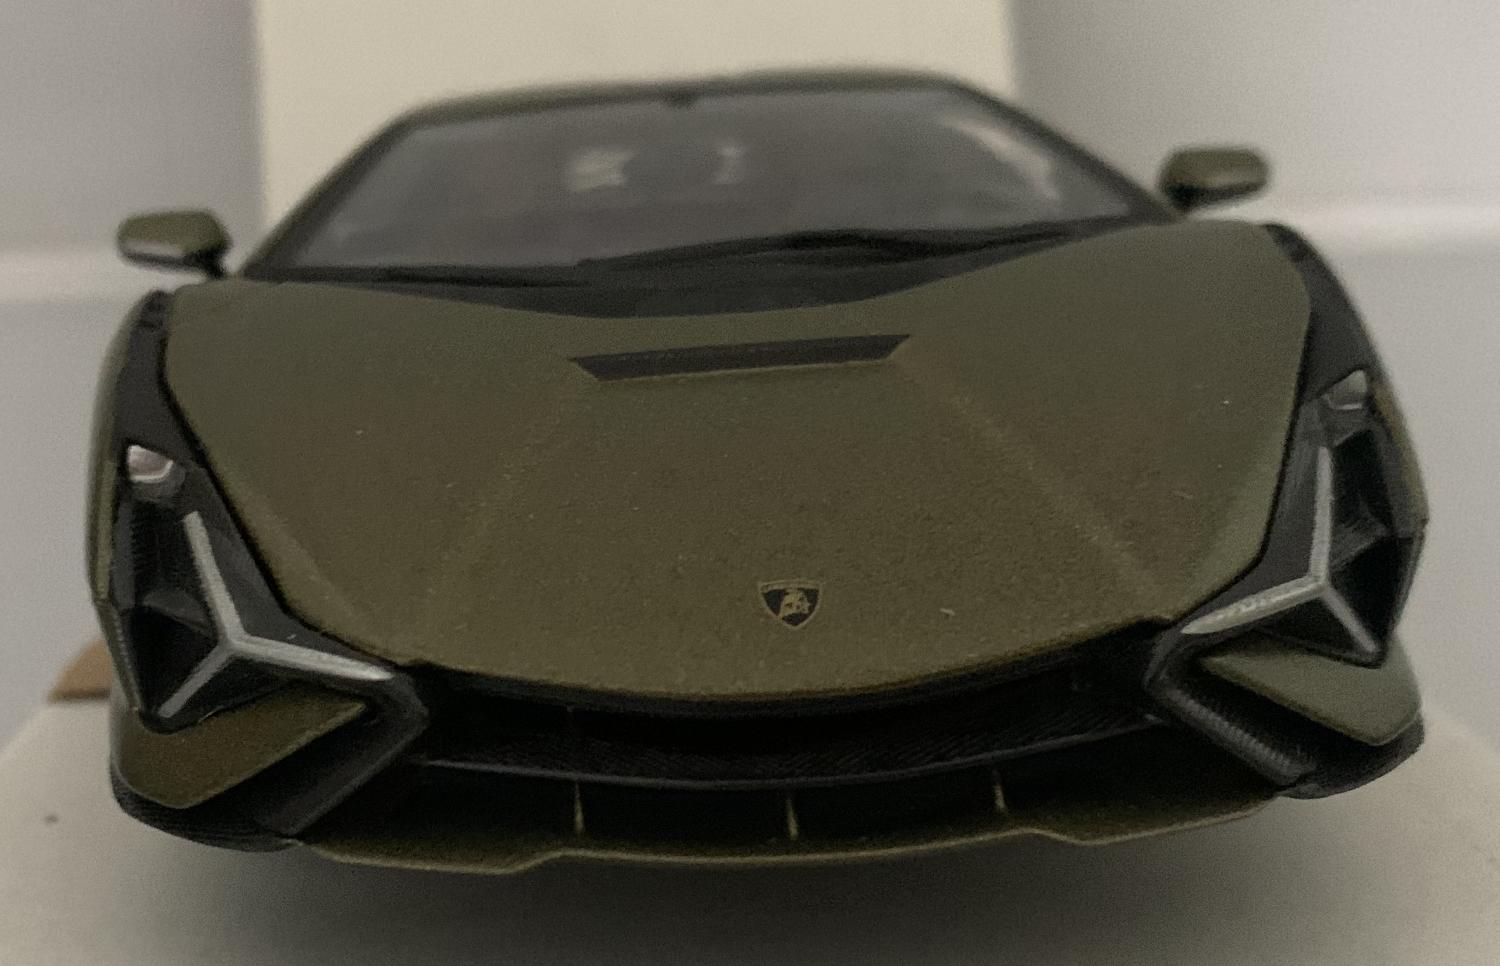 An excellent reproduction of the Lamborghini Sian FKP 37 with high level of detail throughout, all authentically recreated.  The model is presented in a window display box, the car is approx. 19.5 cm long and the presentation box is 23 cm long